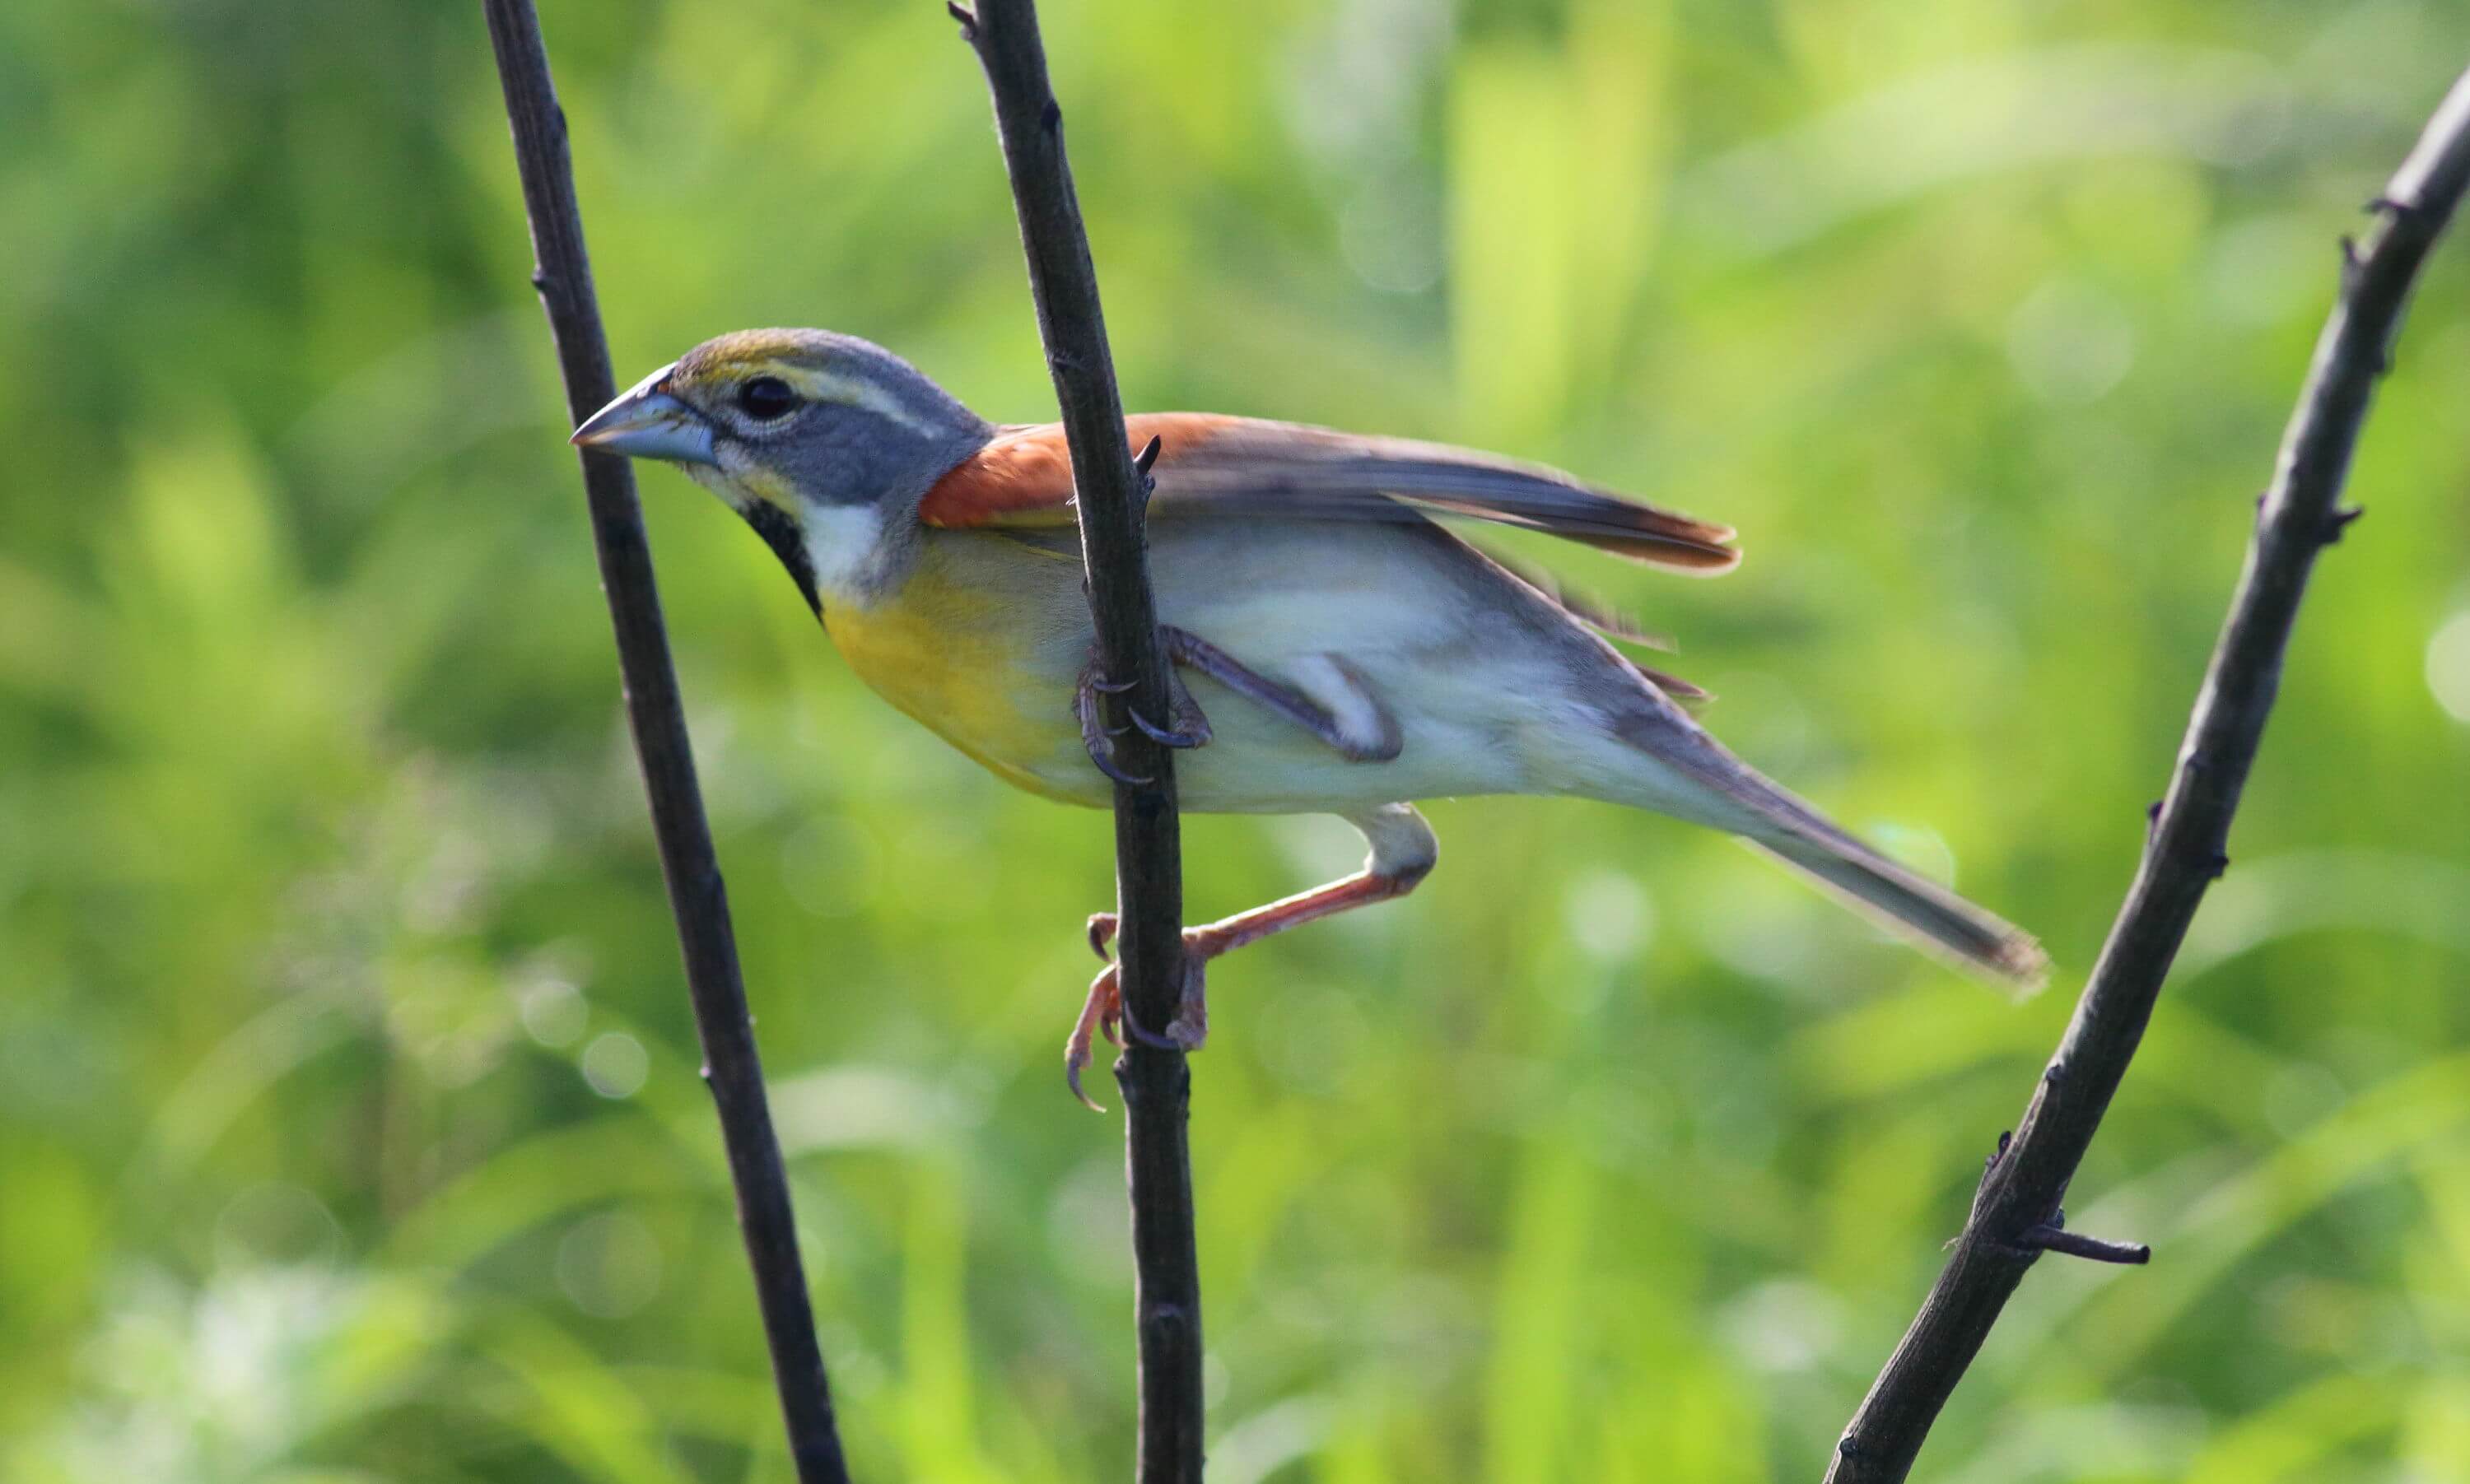 At Spring Lake Park, I saw this male Dickcissel in a restored patch of prairie. Photo by Bruce Beehler